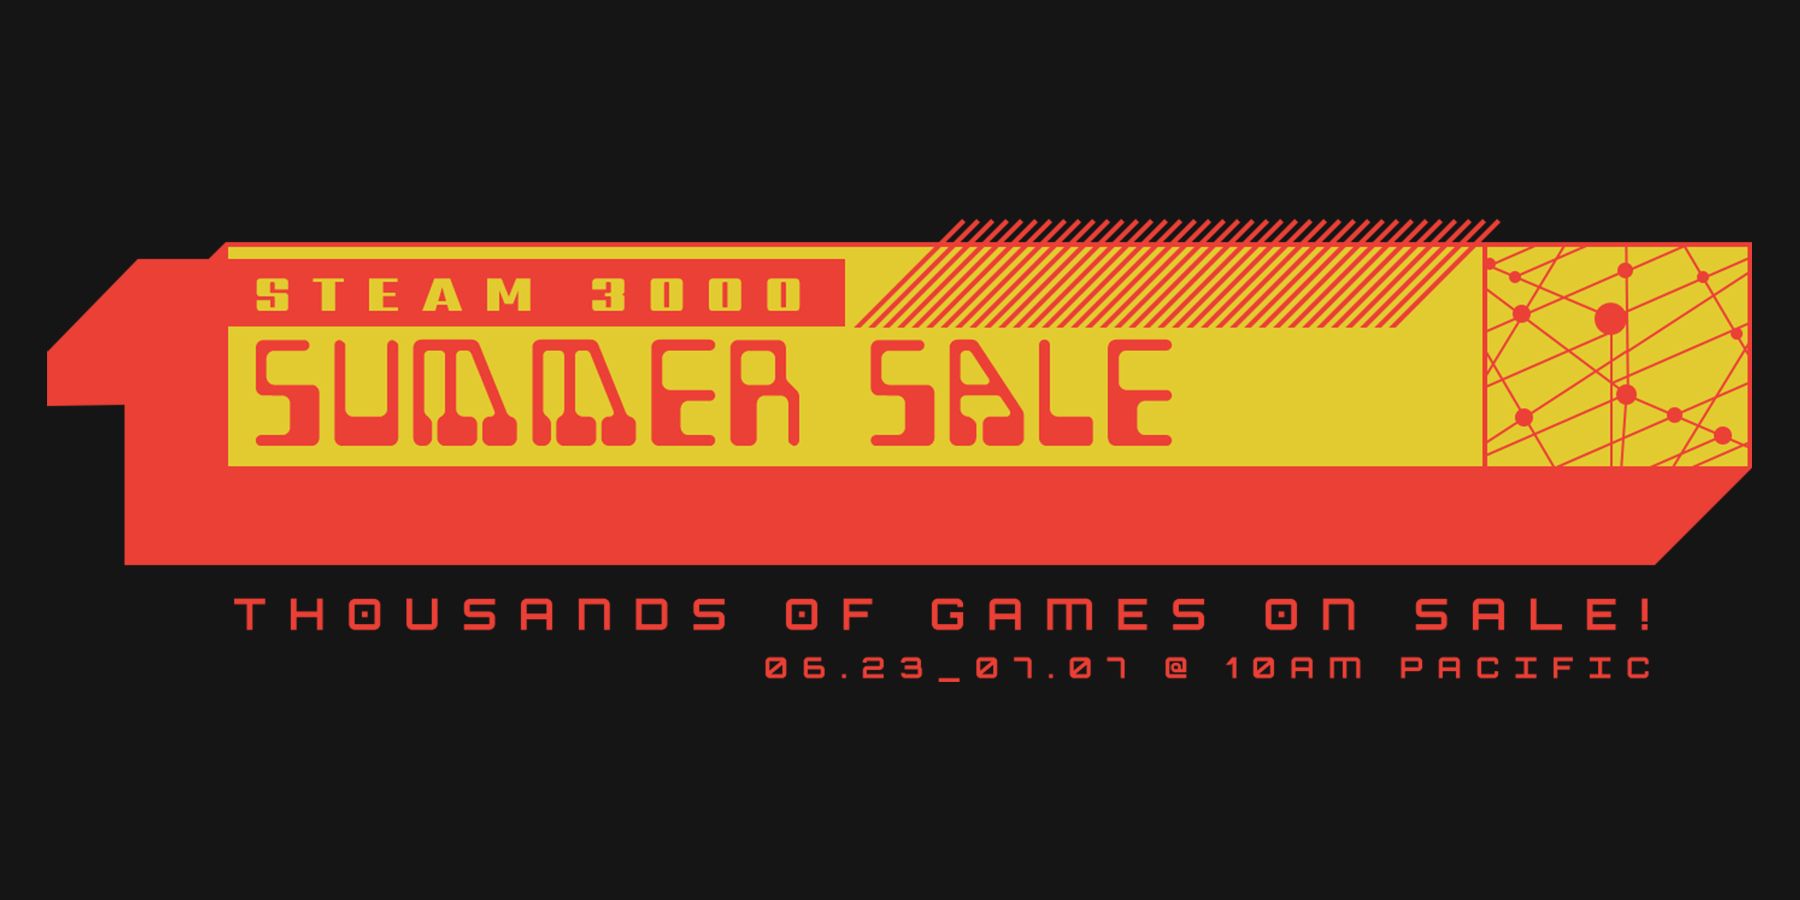 Steam Summer Sale is Live Now with Massive Discounts